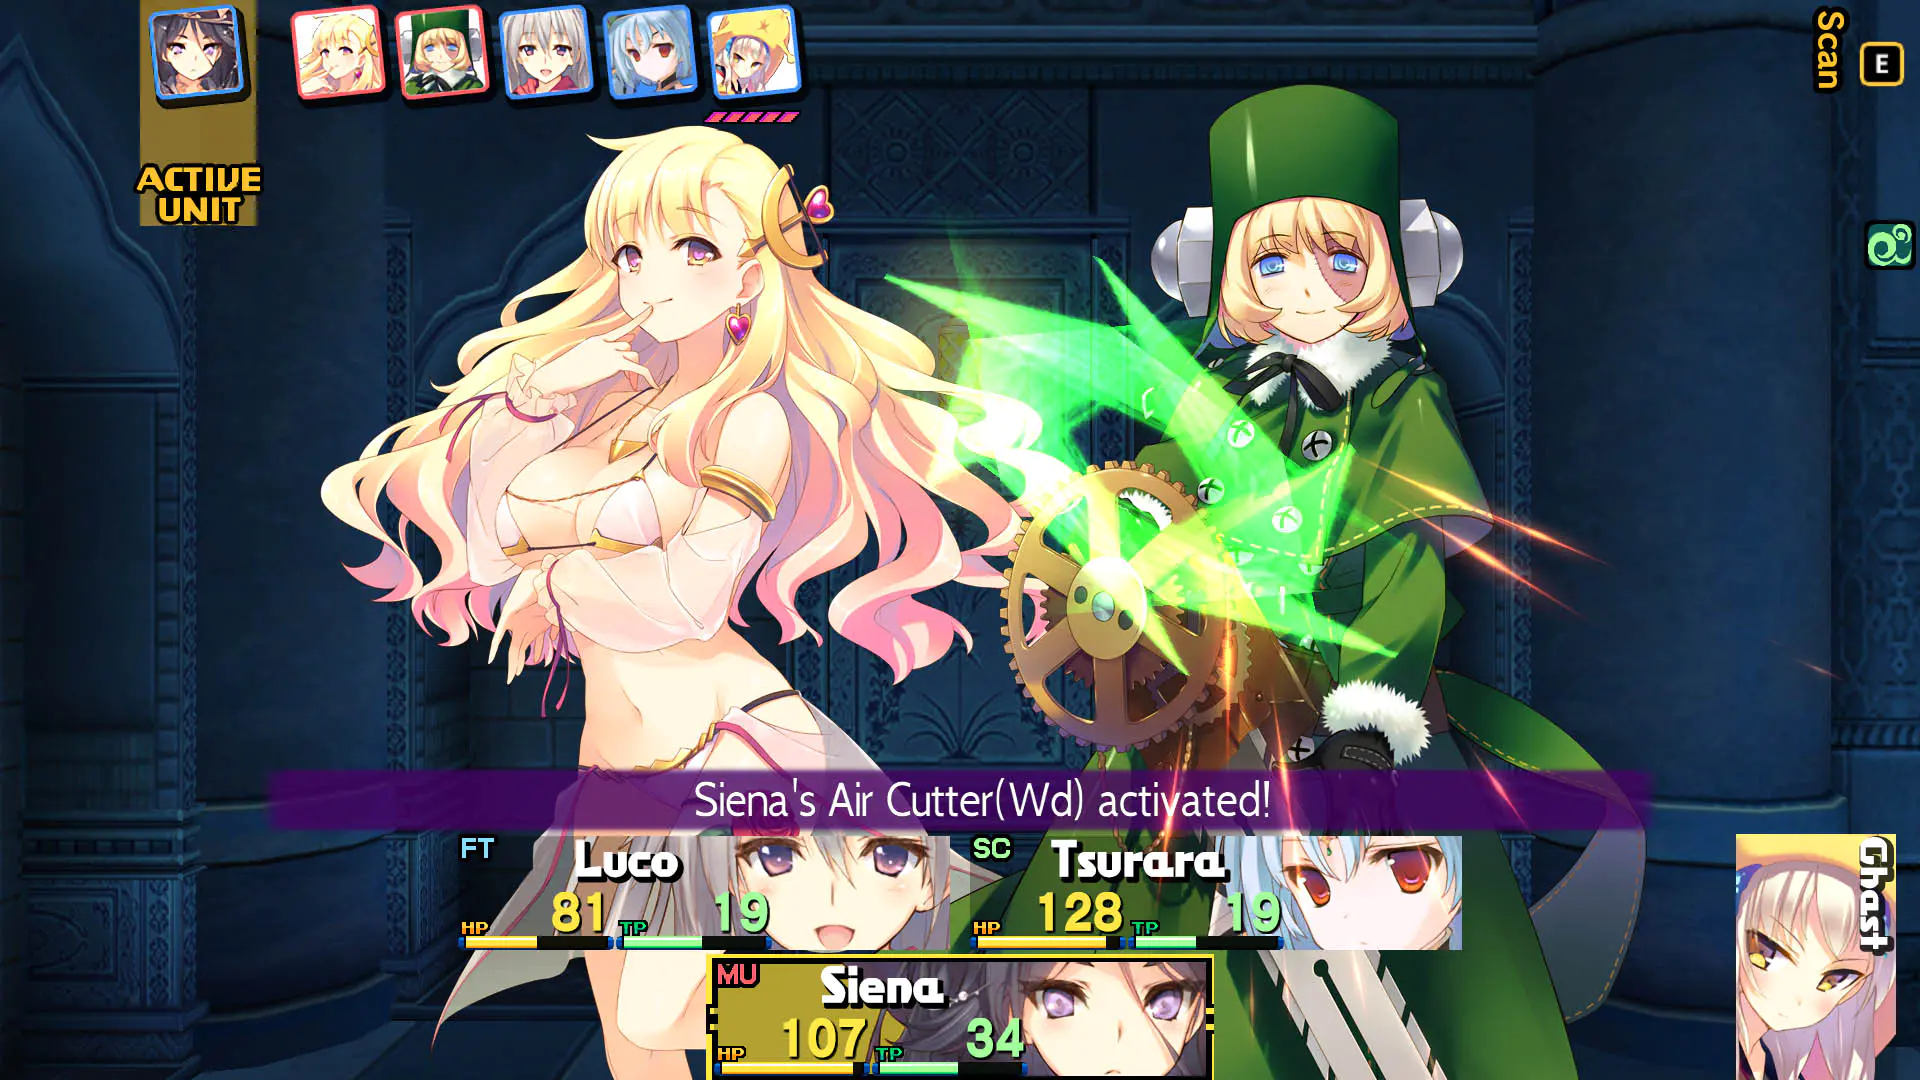 A screenshot depicting some of the characters in Dungeon Travelers 2